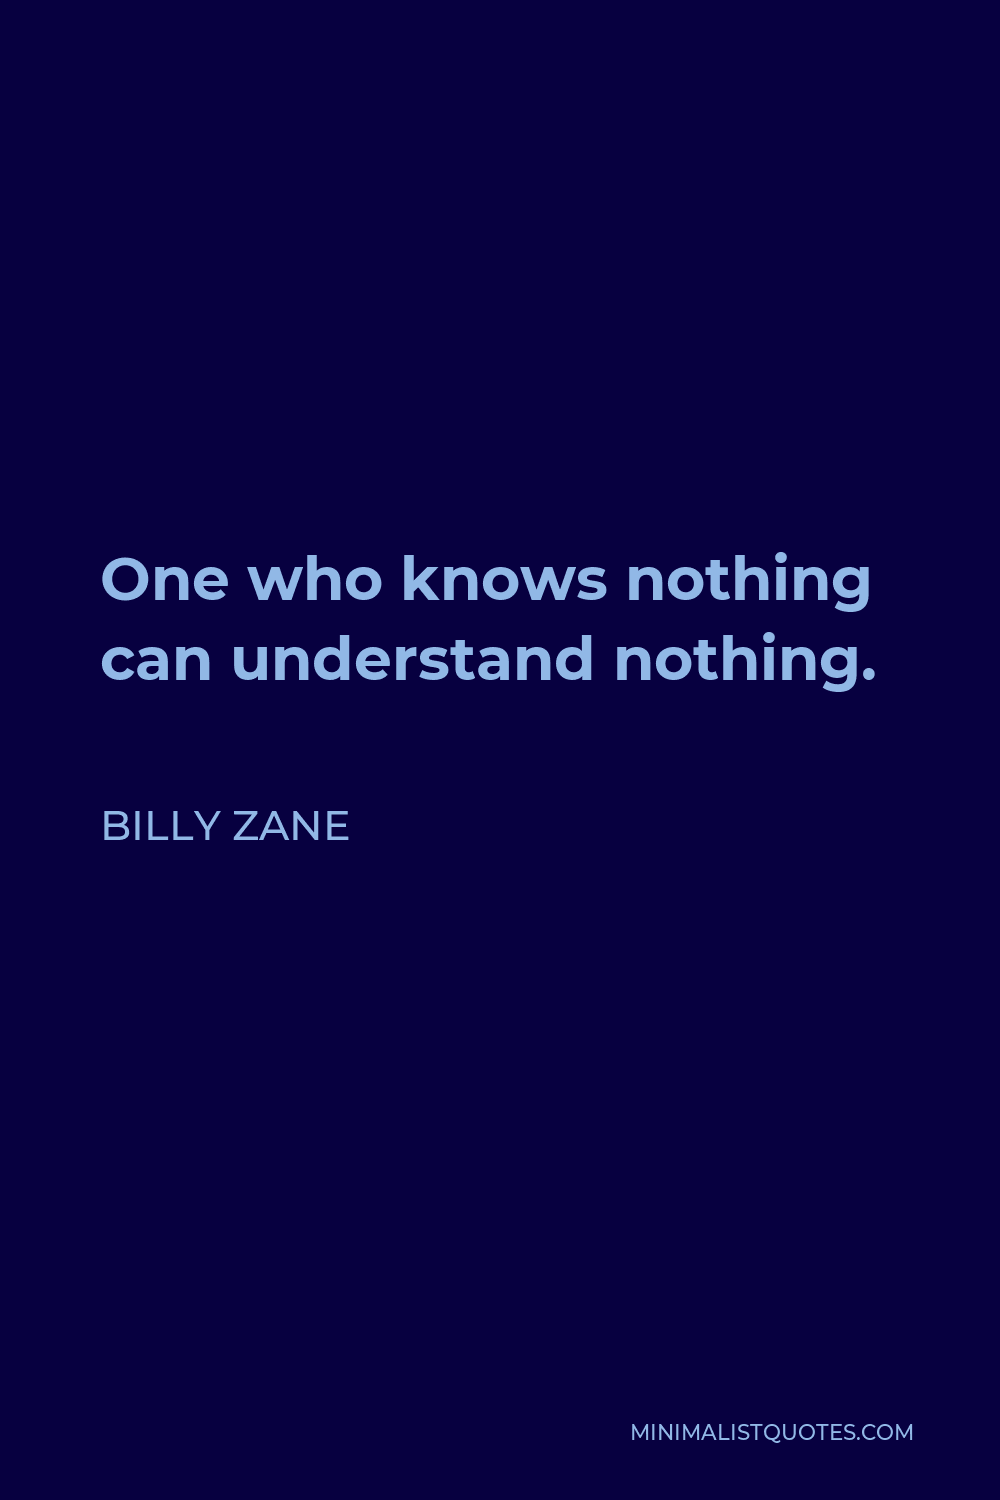 Billy Zane Quote - One who knows nothing can understand nothing.